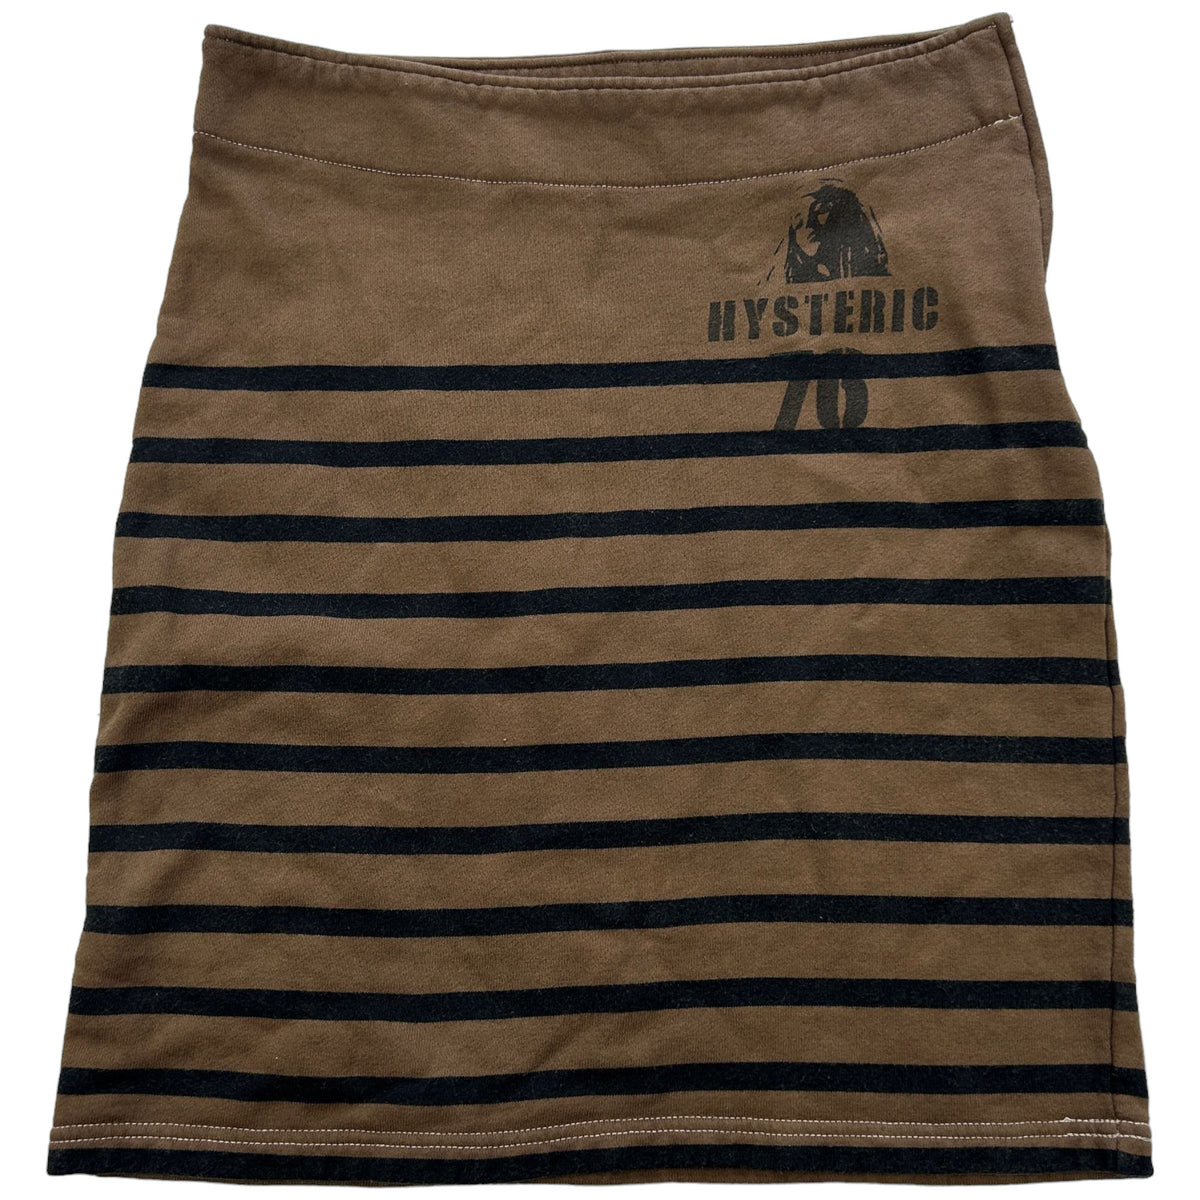 Vintage Hysteric Glamour Striped Skirt Size W28